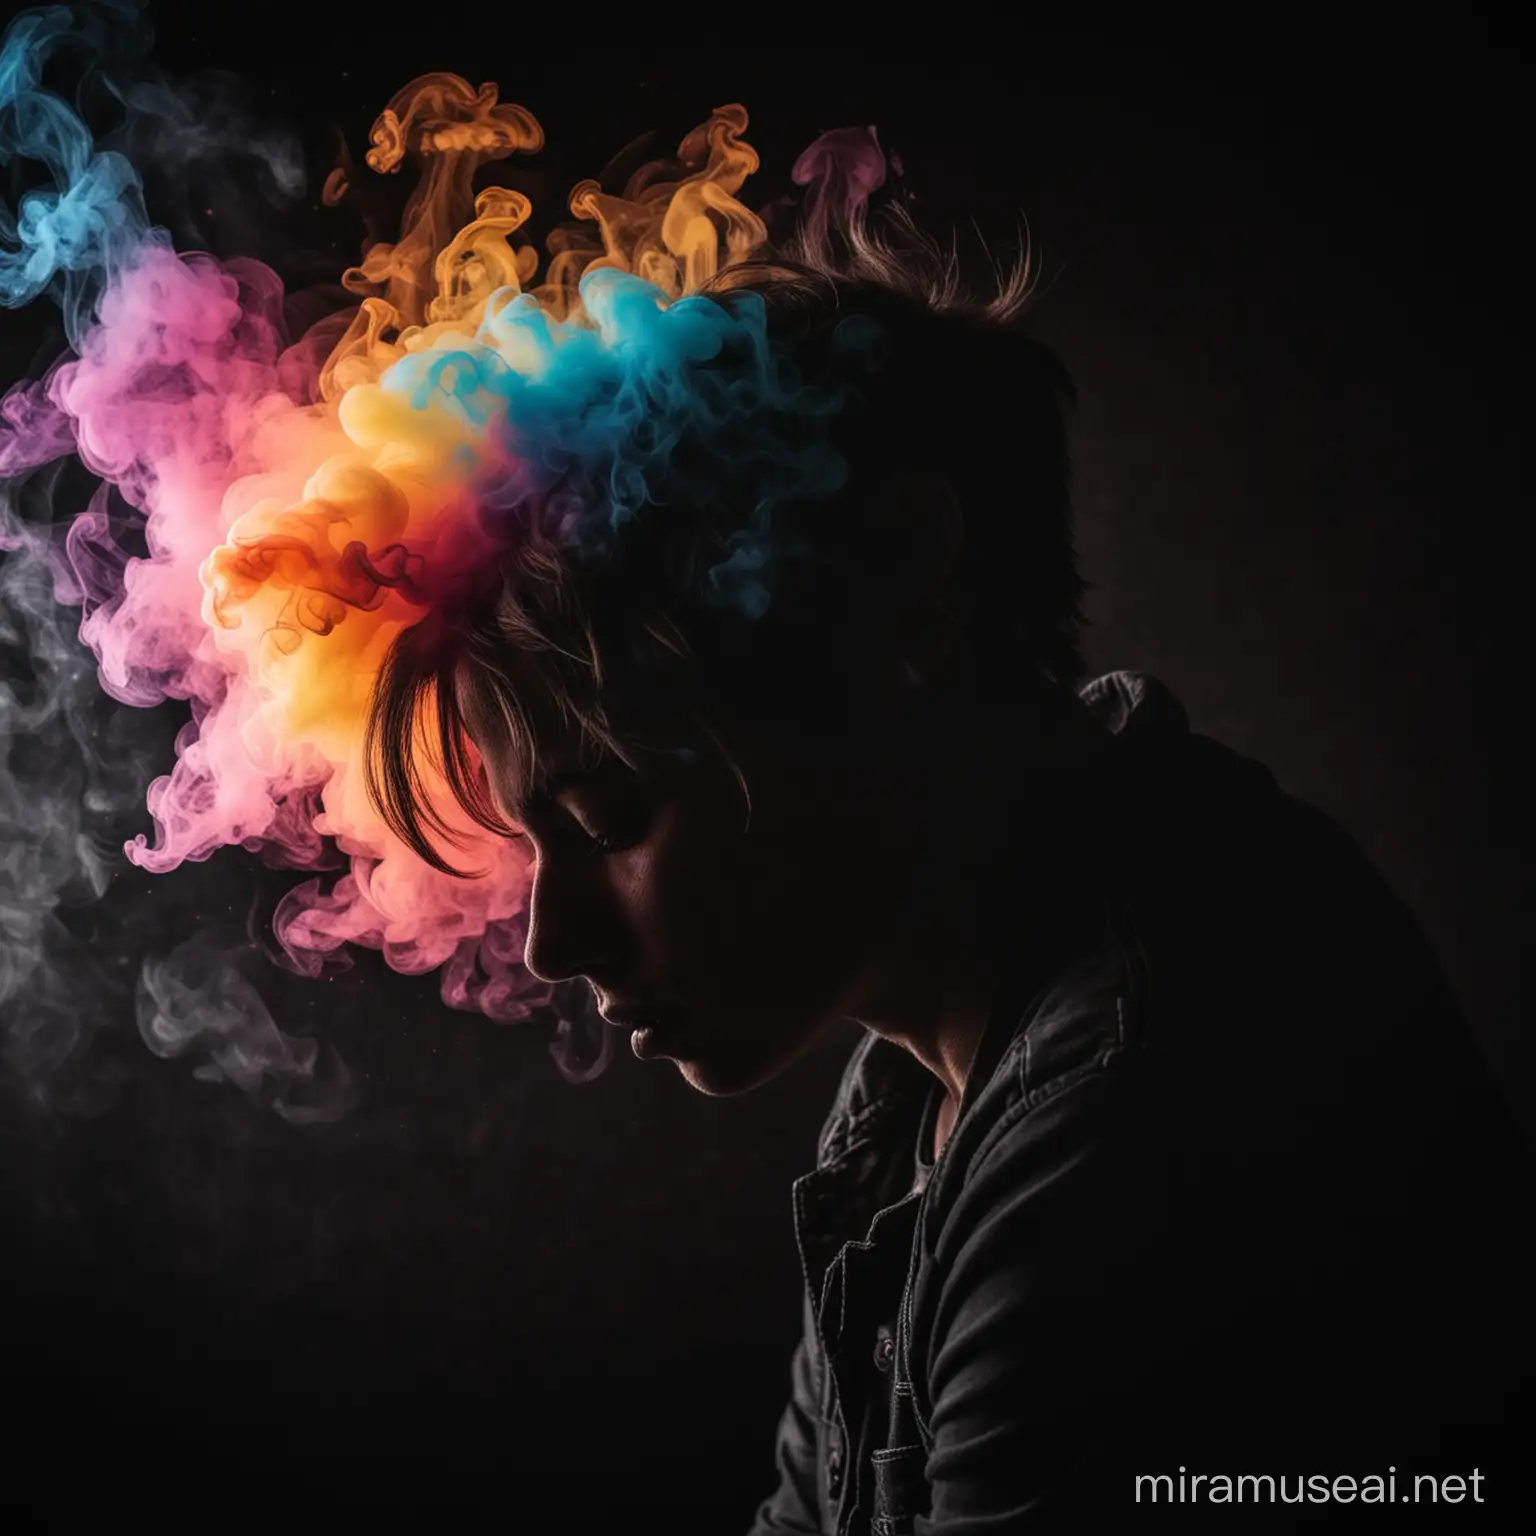 Exhausted Silhouette with Colorful Smoke on Noir Background